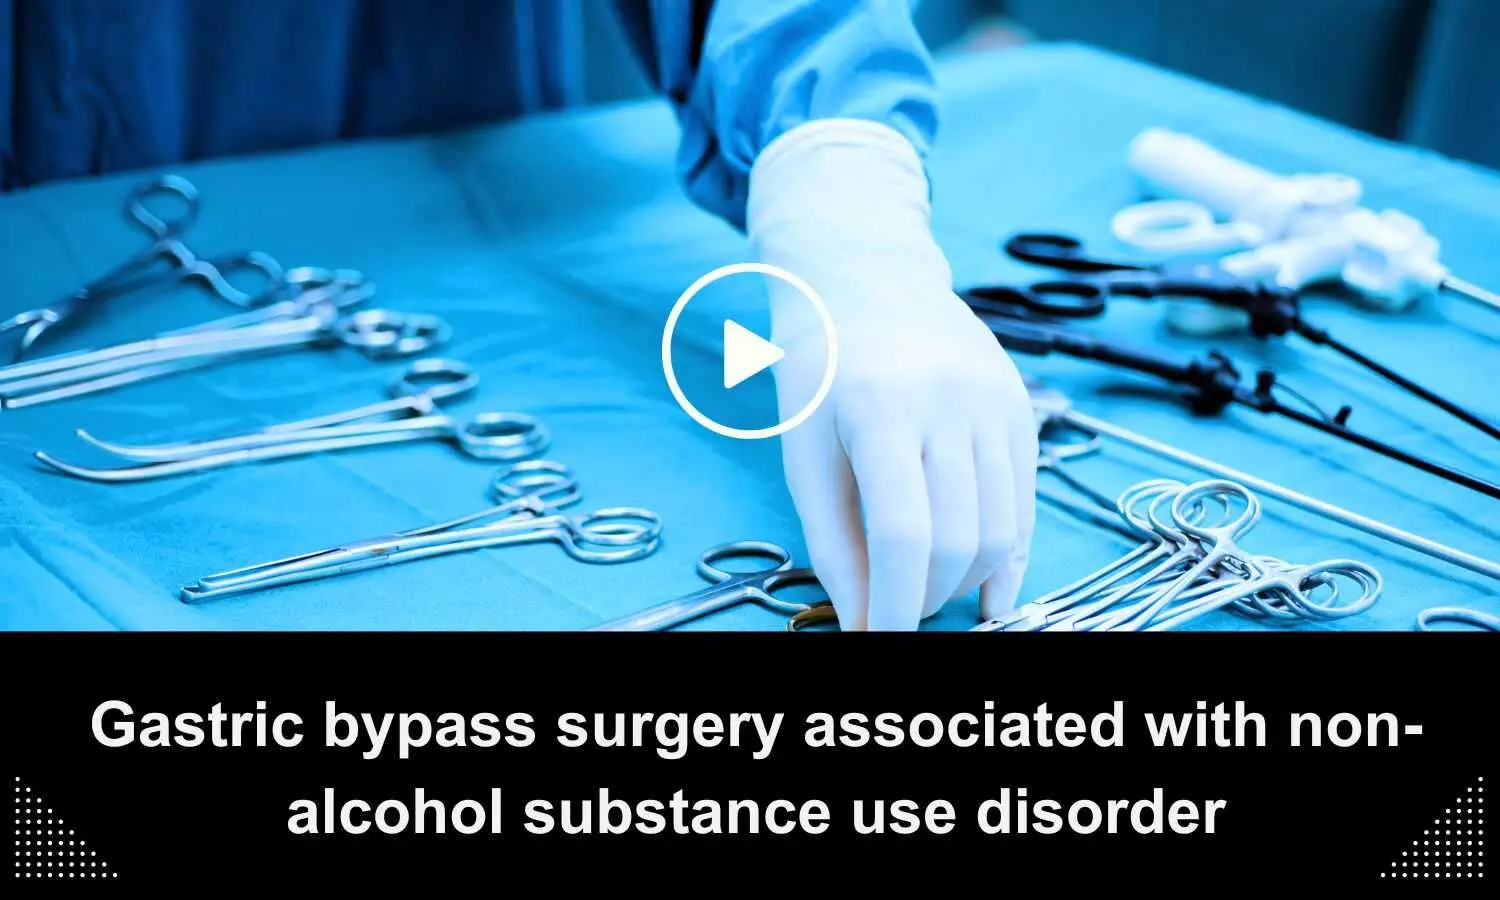 Gastric bypass surgery associated with non-alcohol substance use disorder